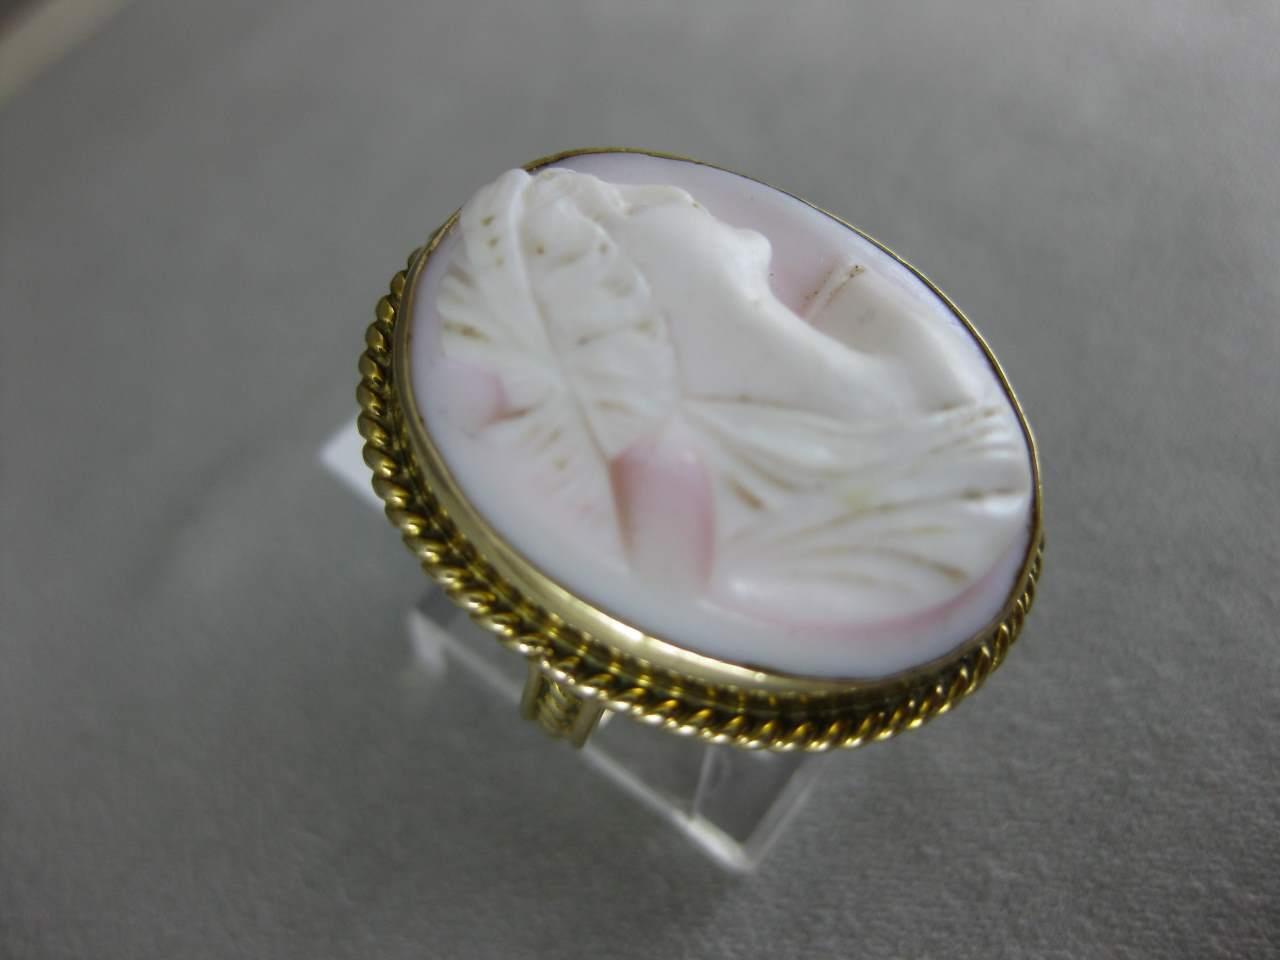 ANTIQUE 14KT YELLOW GOLD ANGELSKIN CORAL CAMEO LA… - image 10